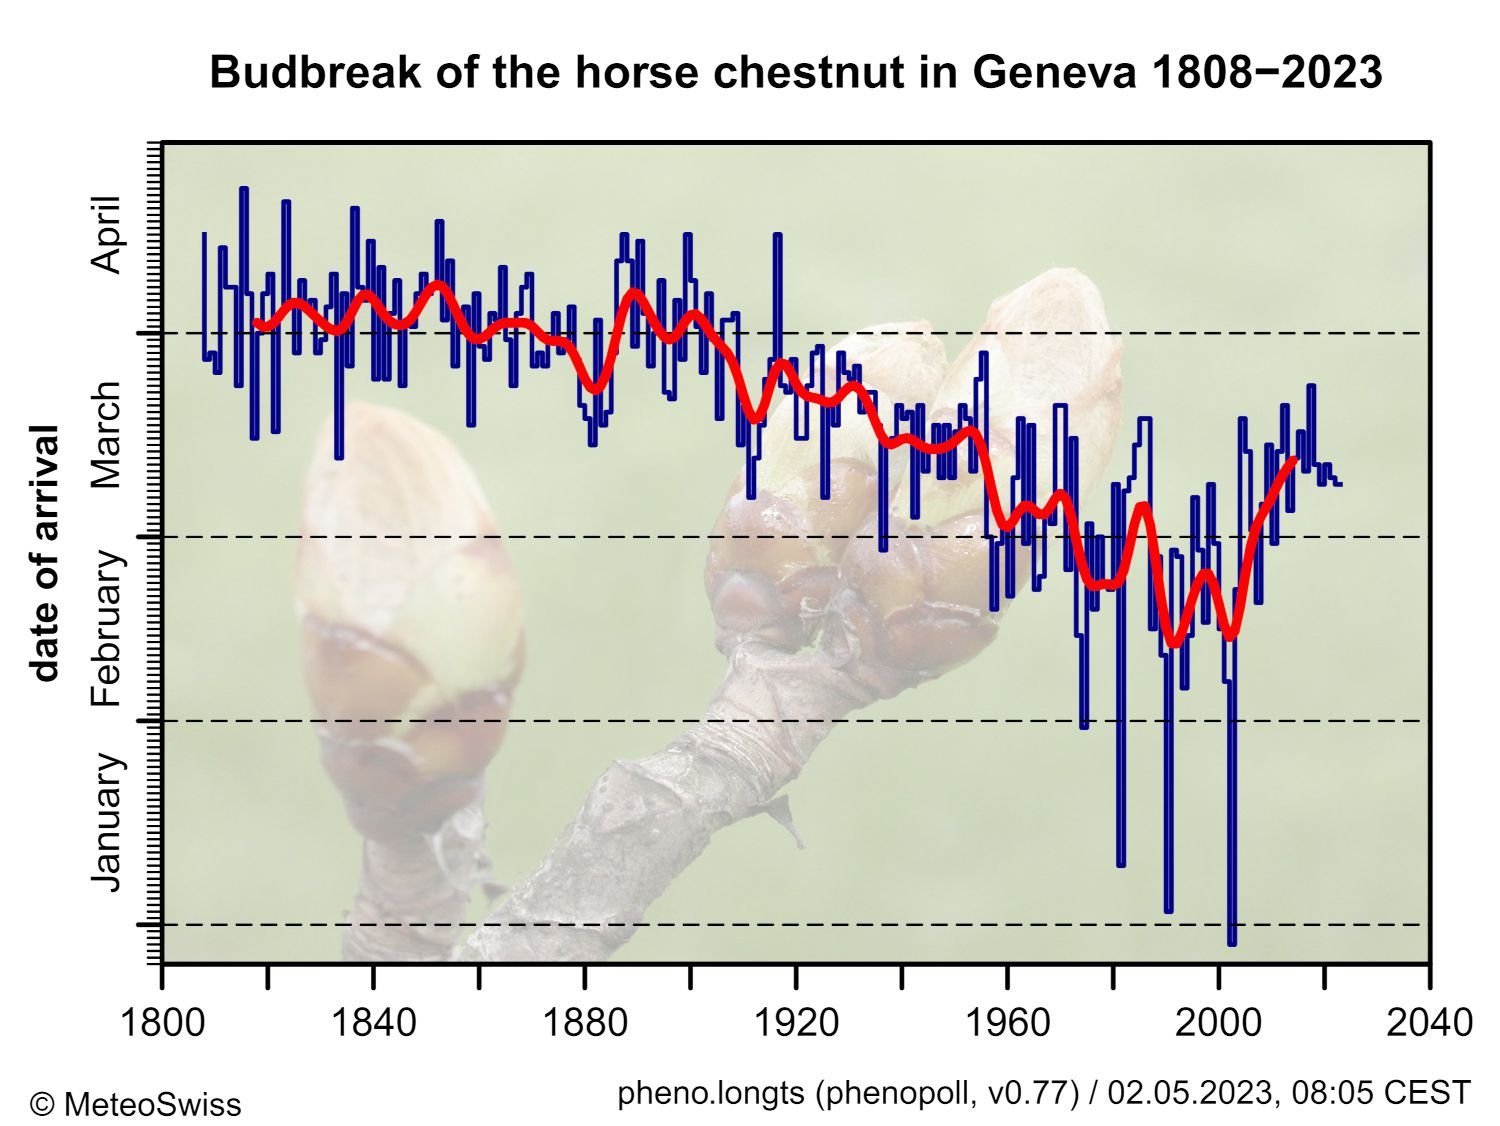 Budbreak of the horse chestnut tree in Geneva since 1808. The red line shows the 20-year weighted average (Gaussian low-pass filter). Data source: Grand Conseil de la République et canton de Genève.